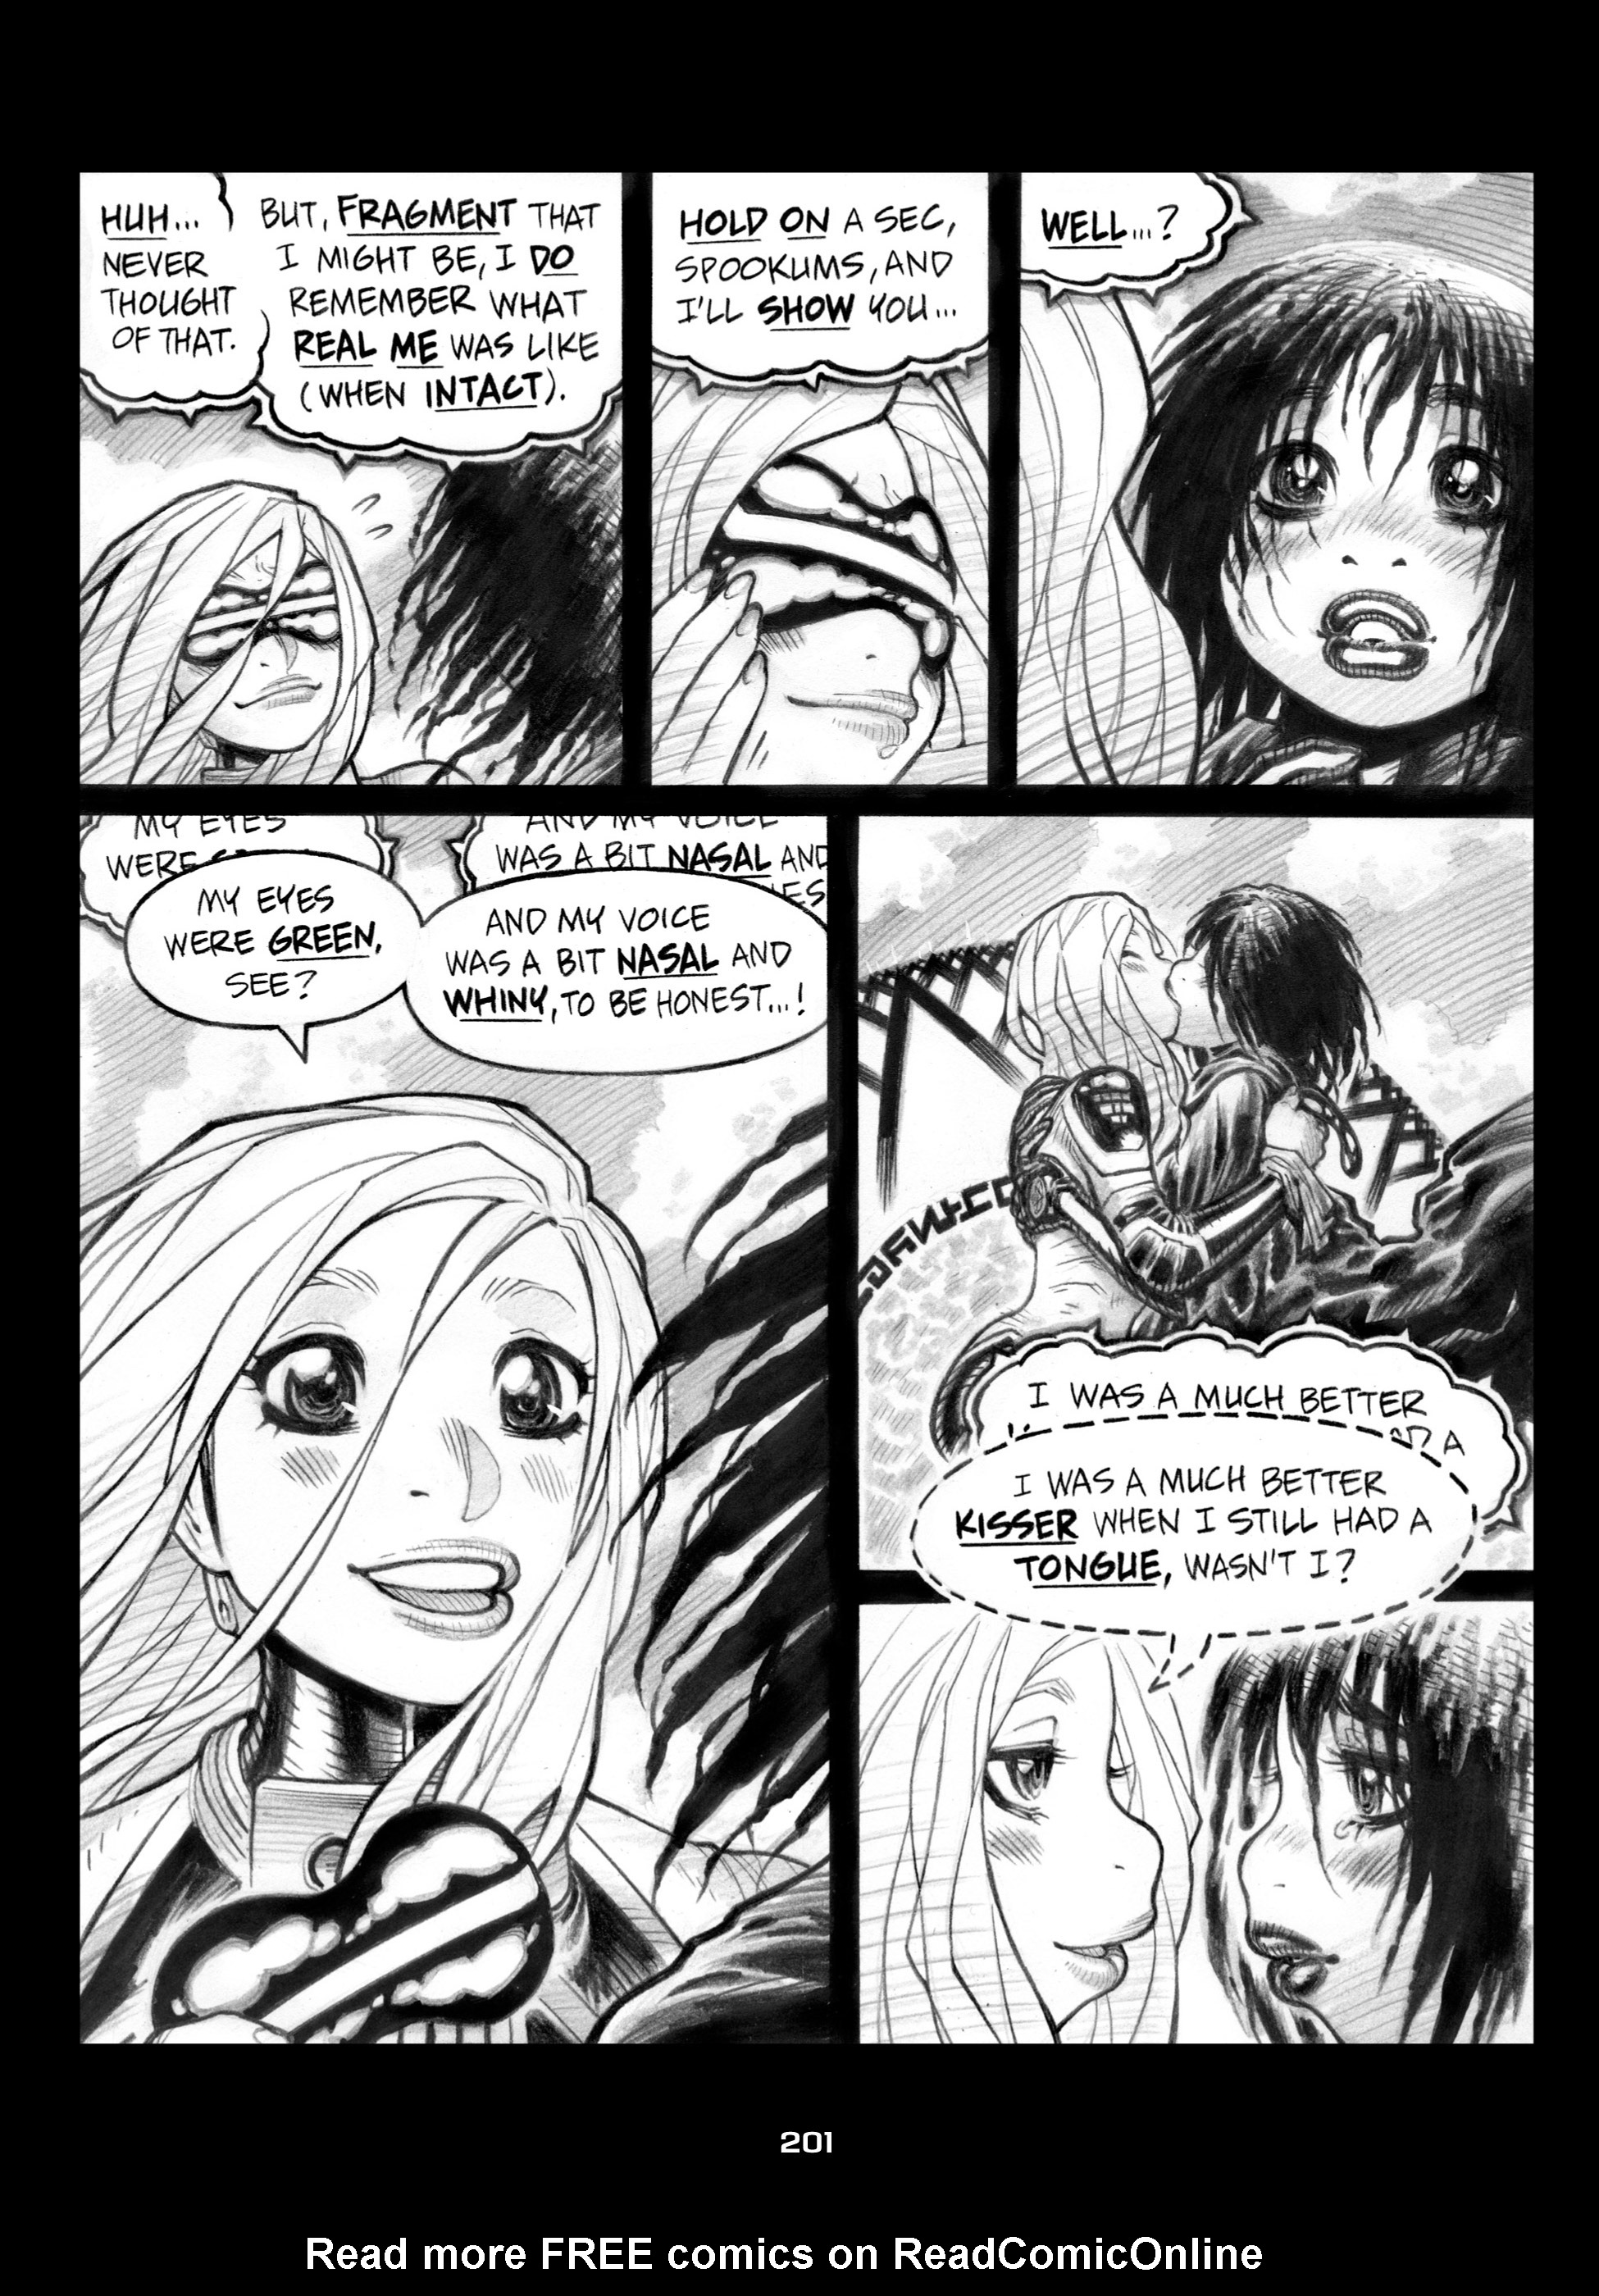 Read online Empowered comic -  Issue #8 - 201